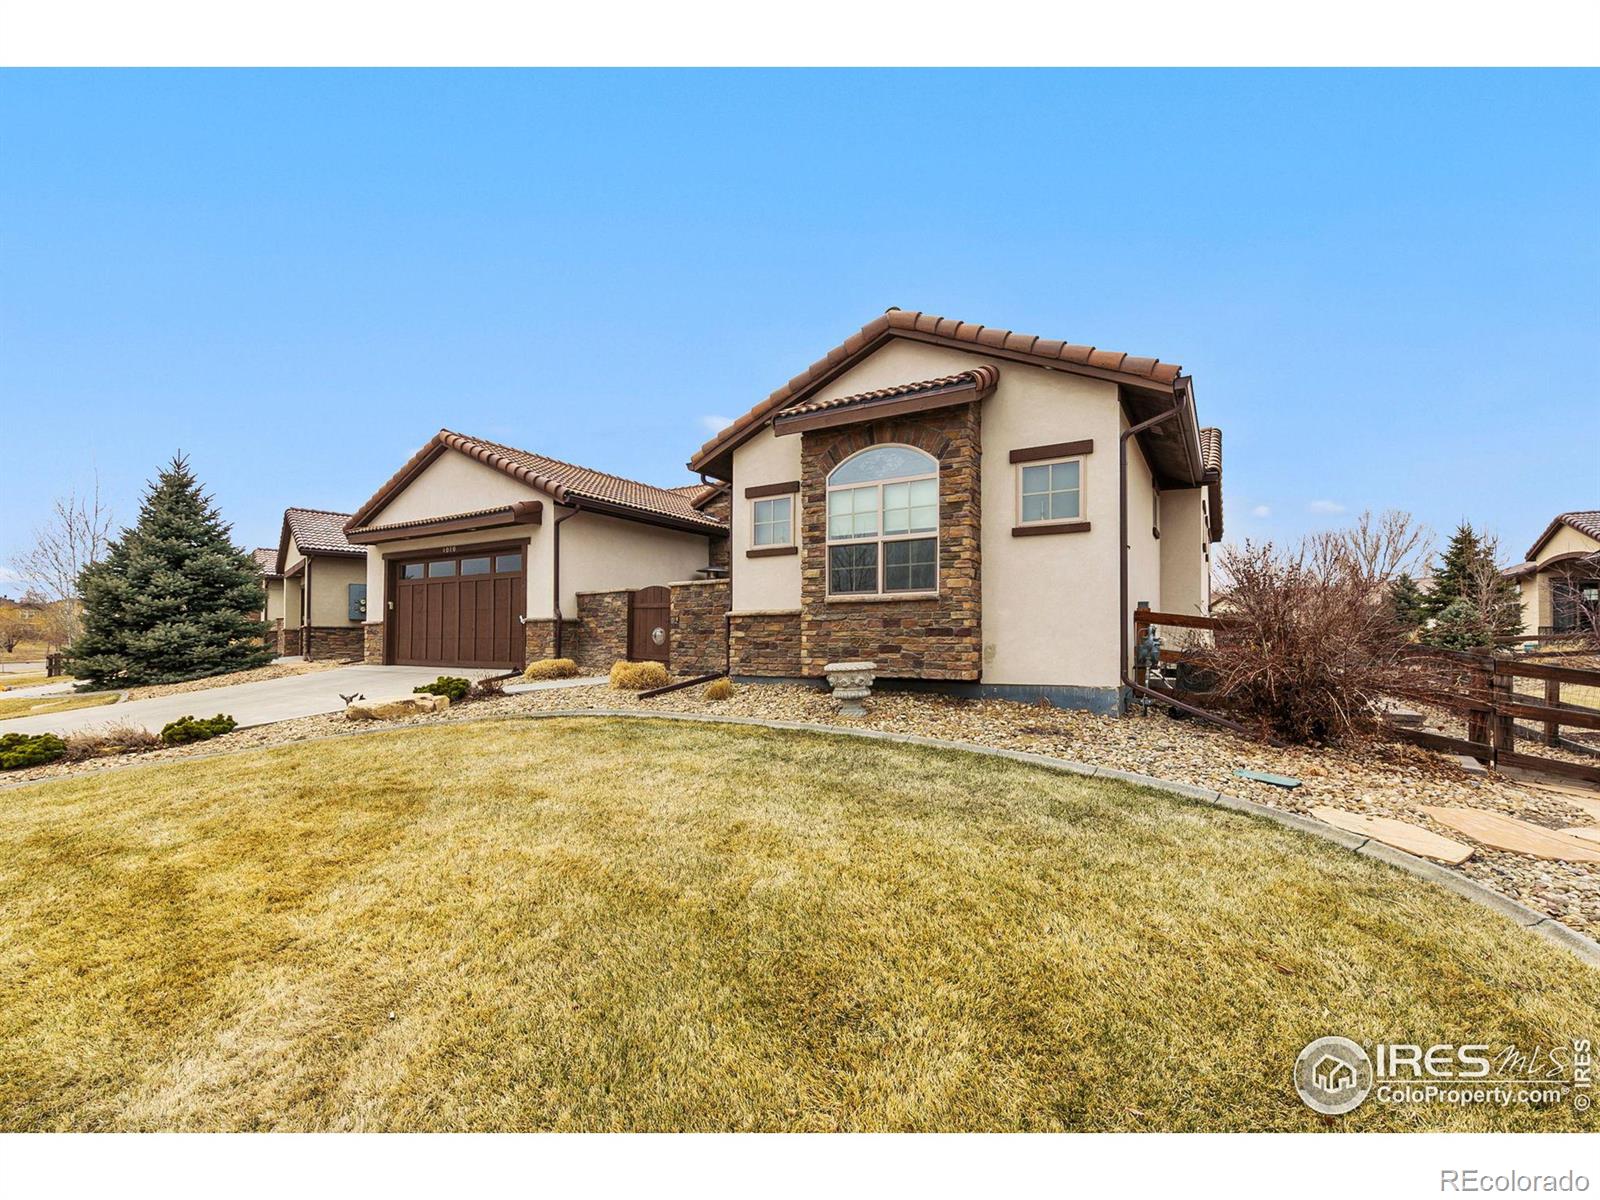 Report Image for 4010  Rock Creek Drive,Fort Collins, Colorado